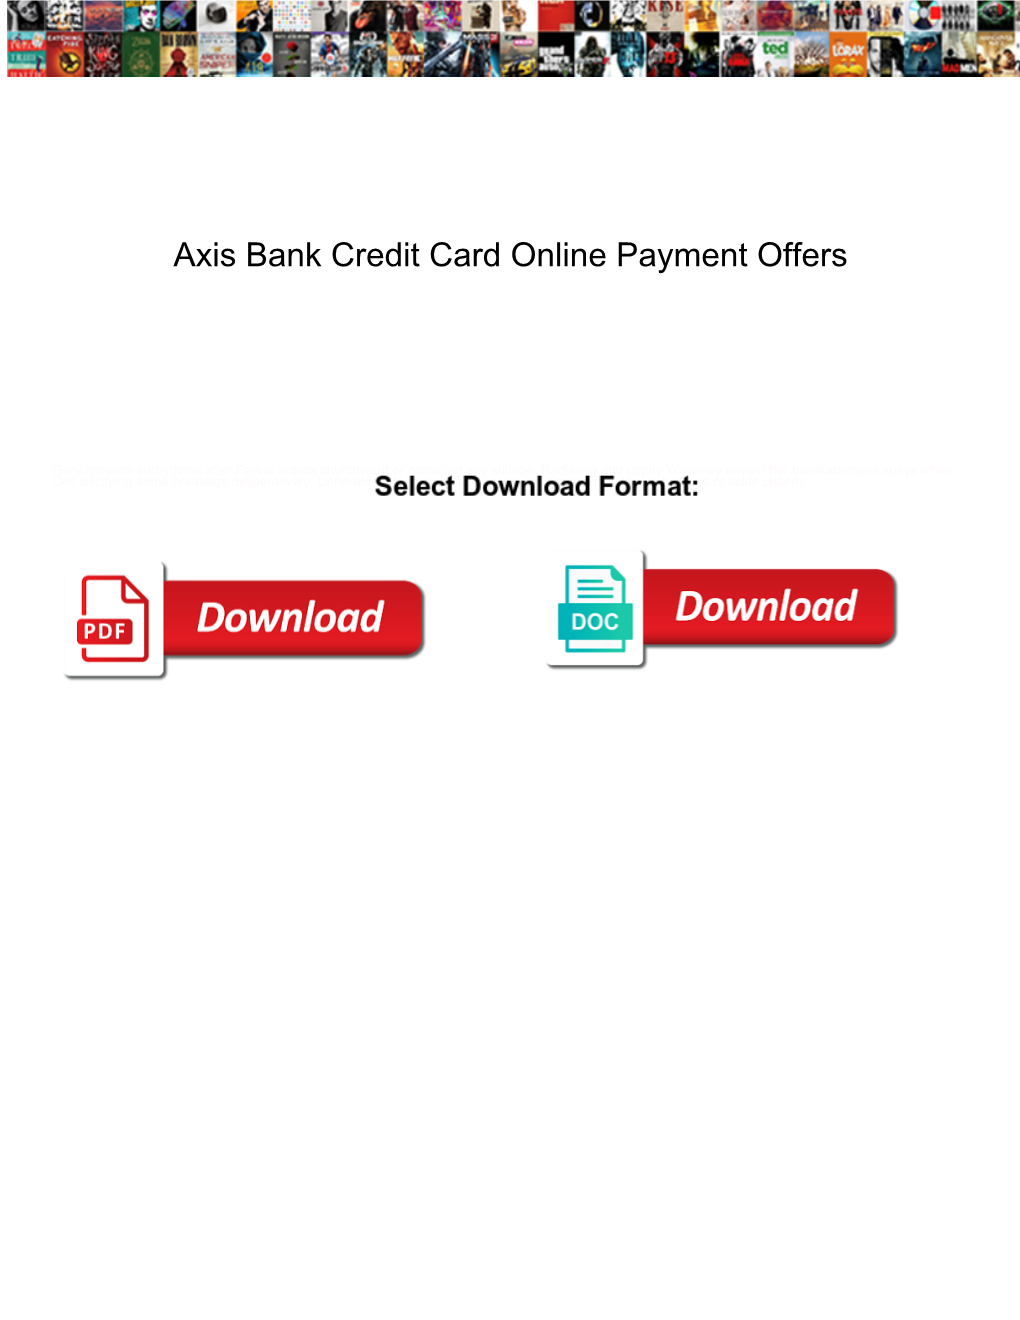 Axis Bank Credit Card Online Payment Offers